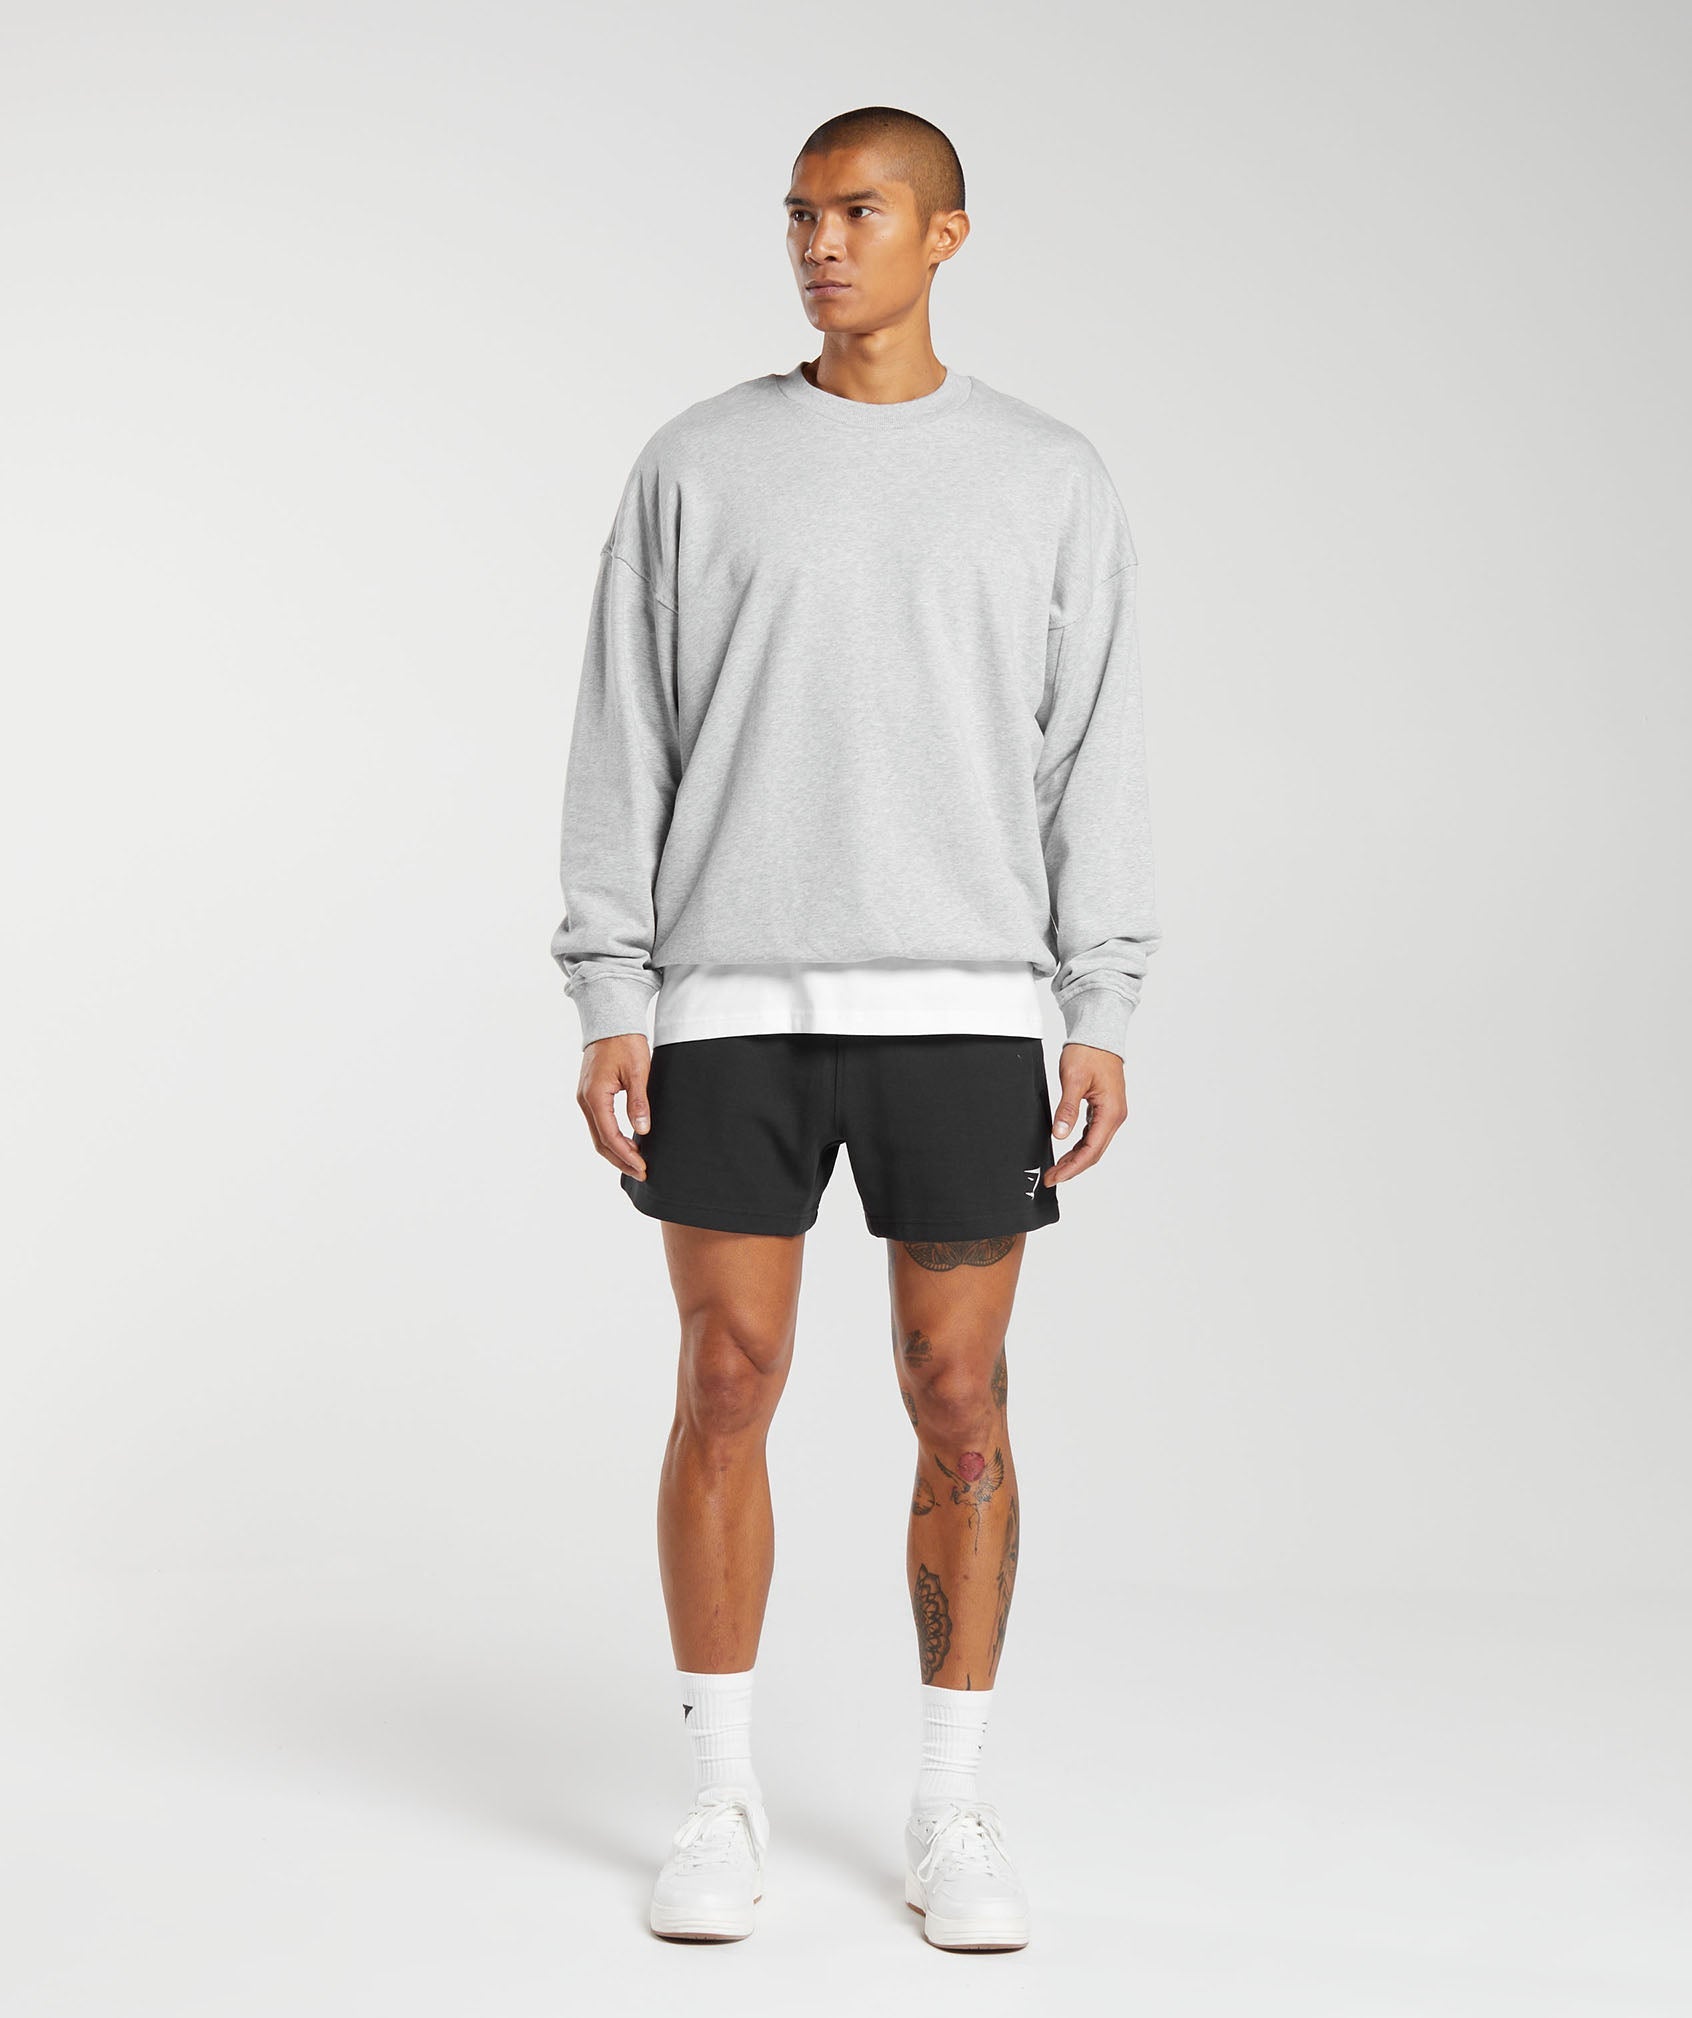 Rest Day Essential Crew in Light Grey Core Marl - view 4